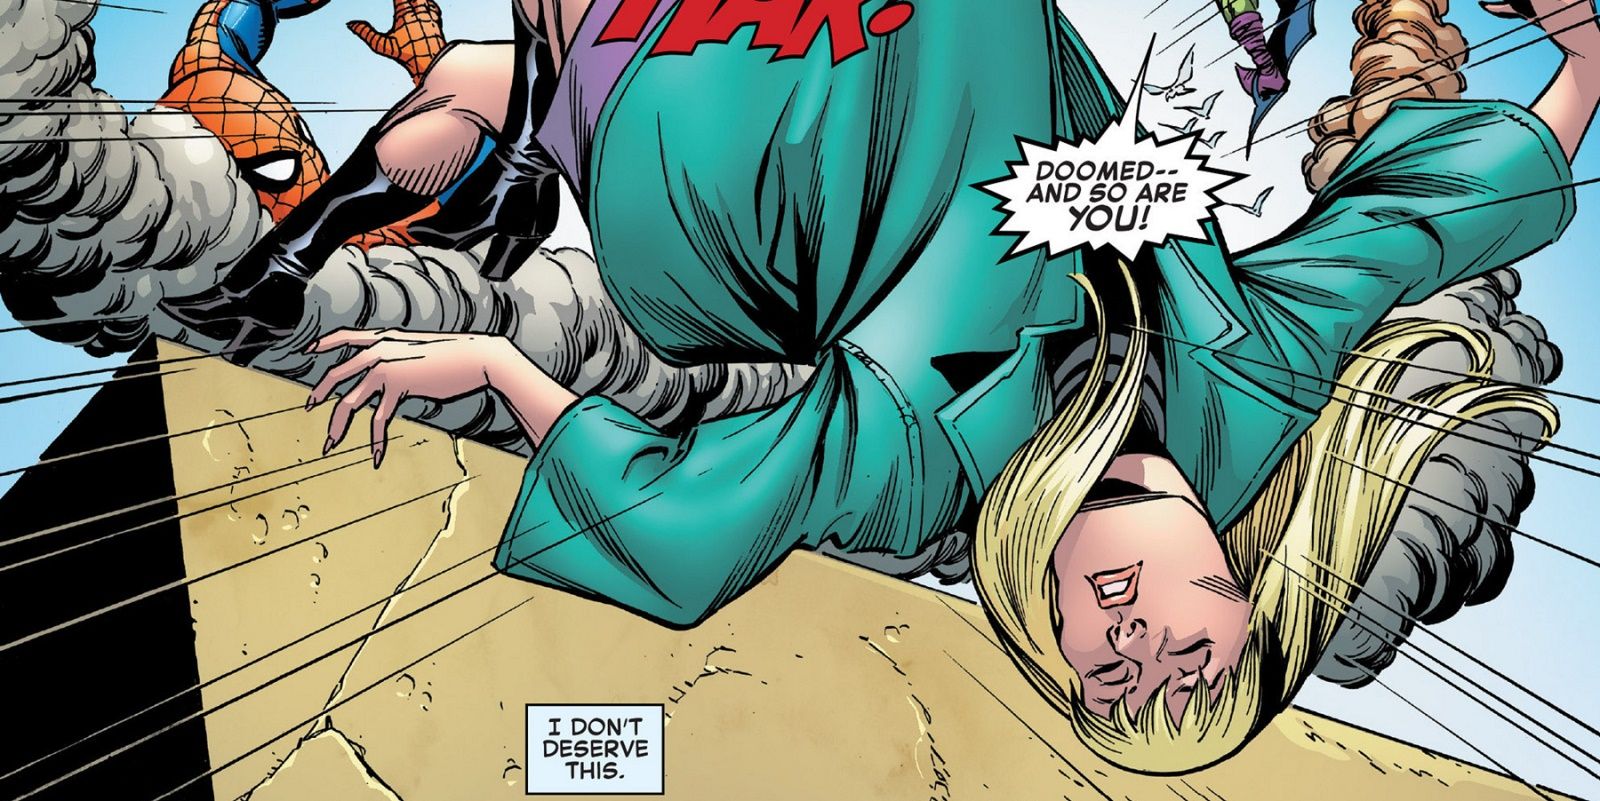 An image of Spider-Man trying to reach Gwen Stacy in the comics